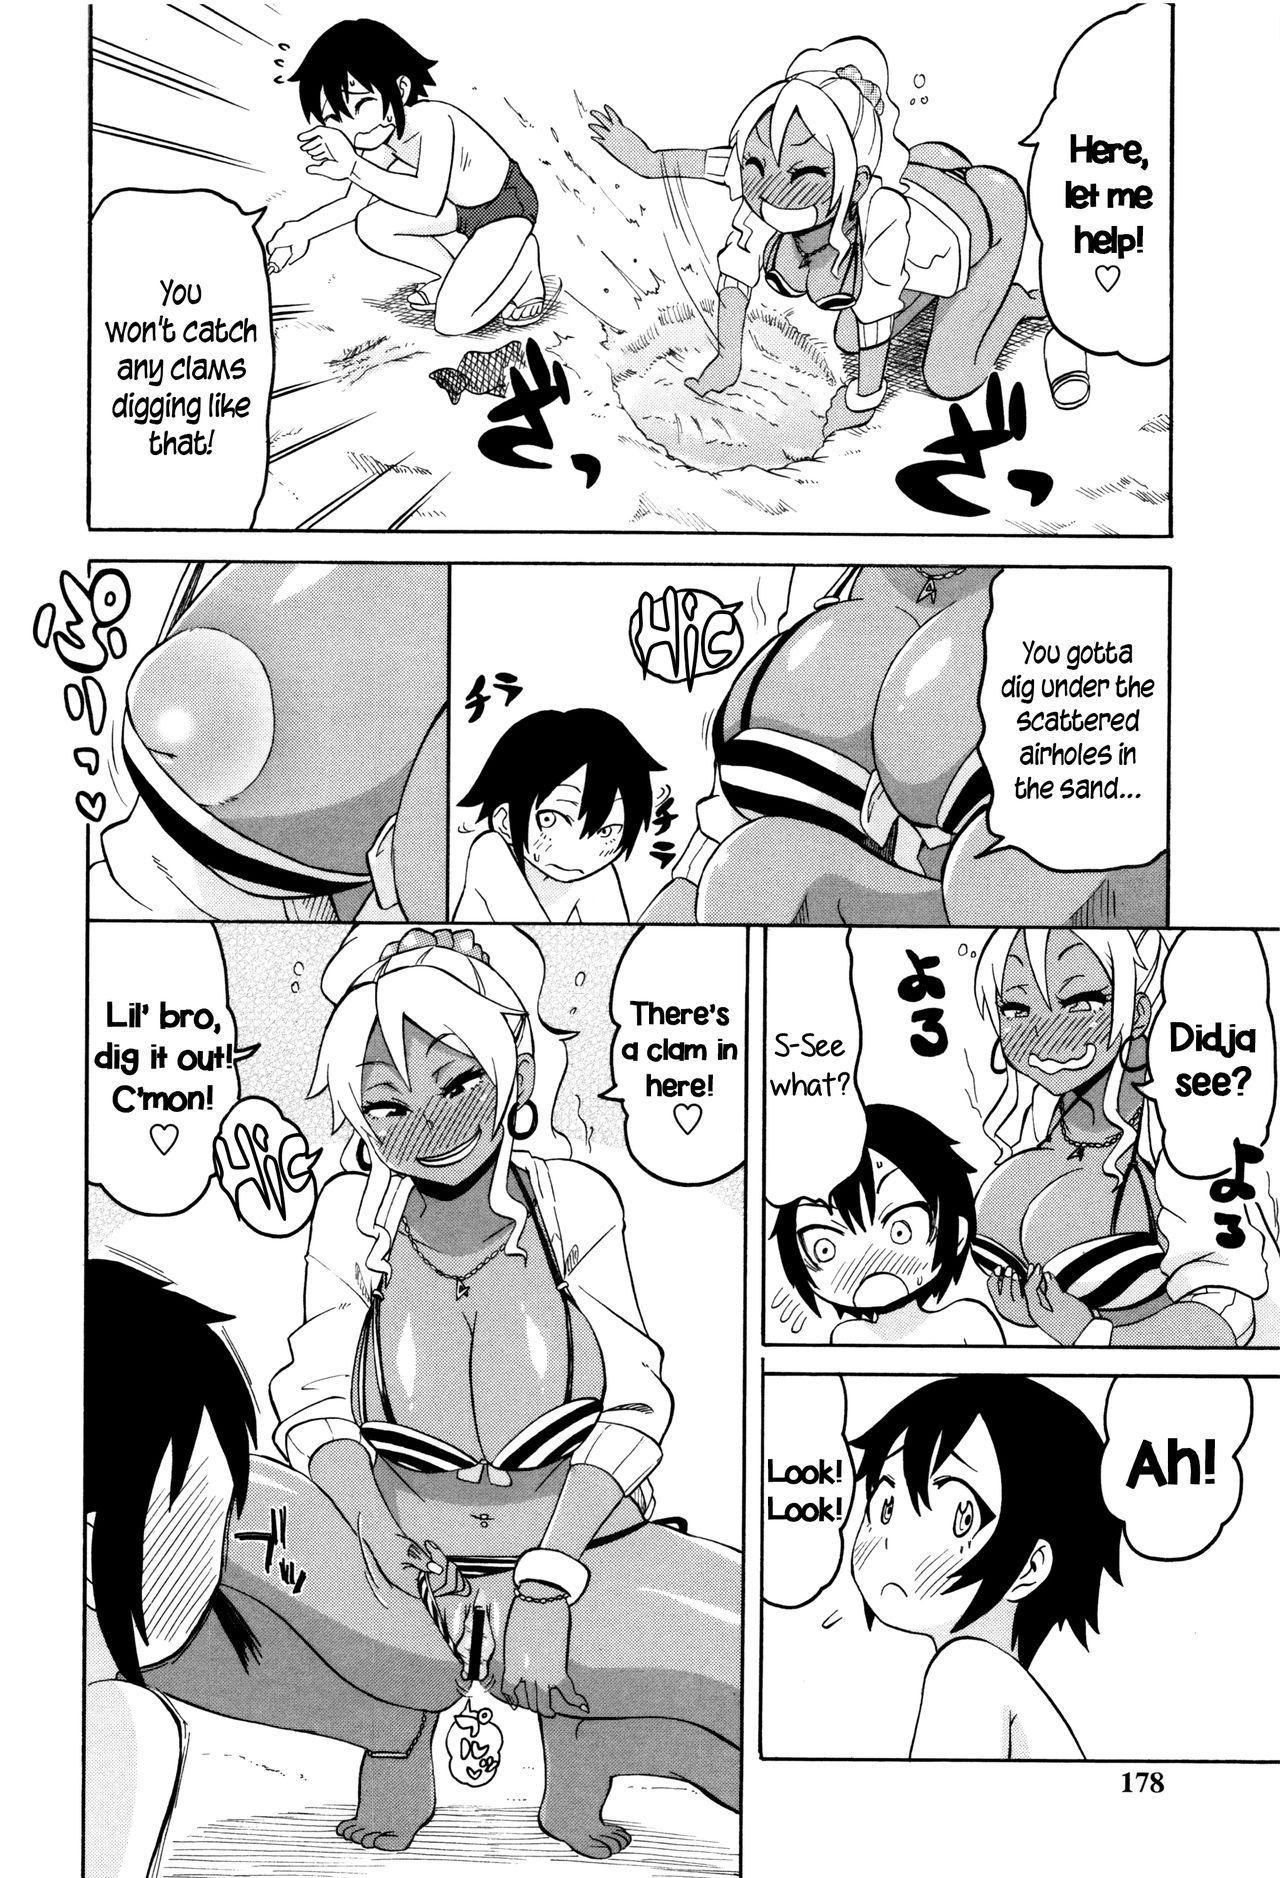 Outdoor Shota to Island Summer Bitch! | Shotas and an Island Summer Bitch Fetish - Page 4